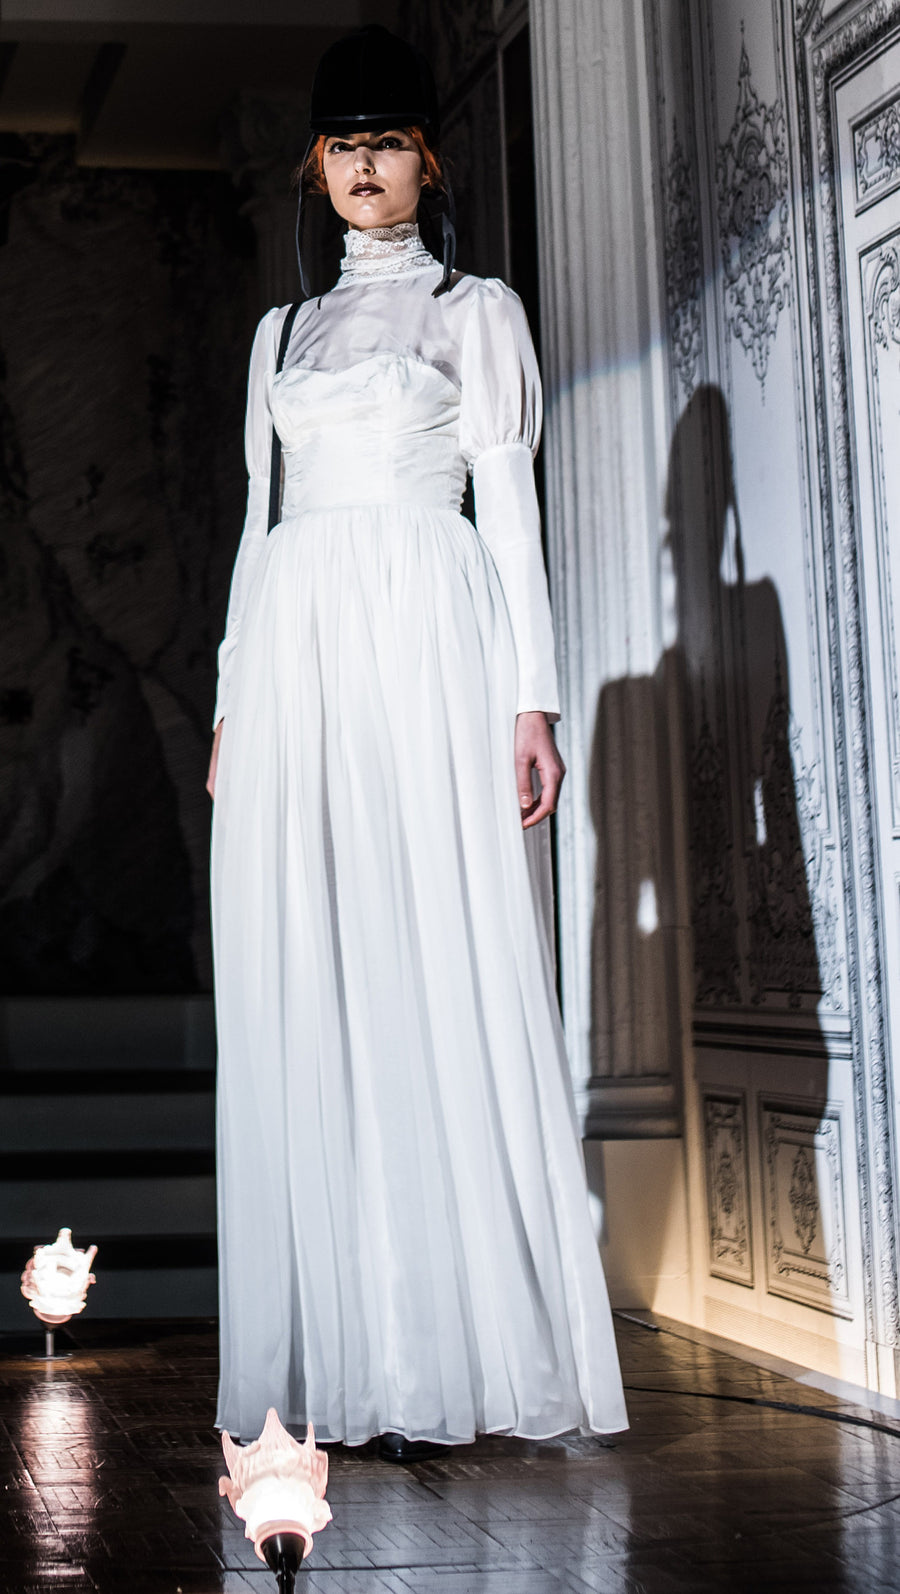 The Explorer Dress Jung White High Neck Victorian Wedding Lace Dress Sheer Shoulders Chest Long Sleeve Lace trim Wendy Nichol Clothing Fashion Designer Handmade in NYC New York City AW14 Living Doll Ready to Wear Fashion Runway Show Custom Tailoring Made to Measure Bride Bridal